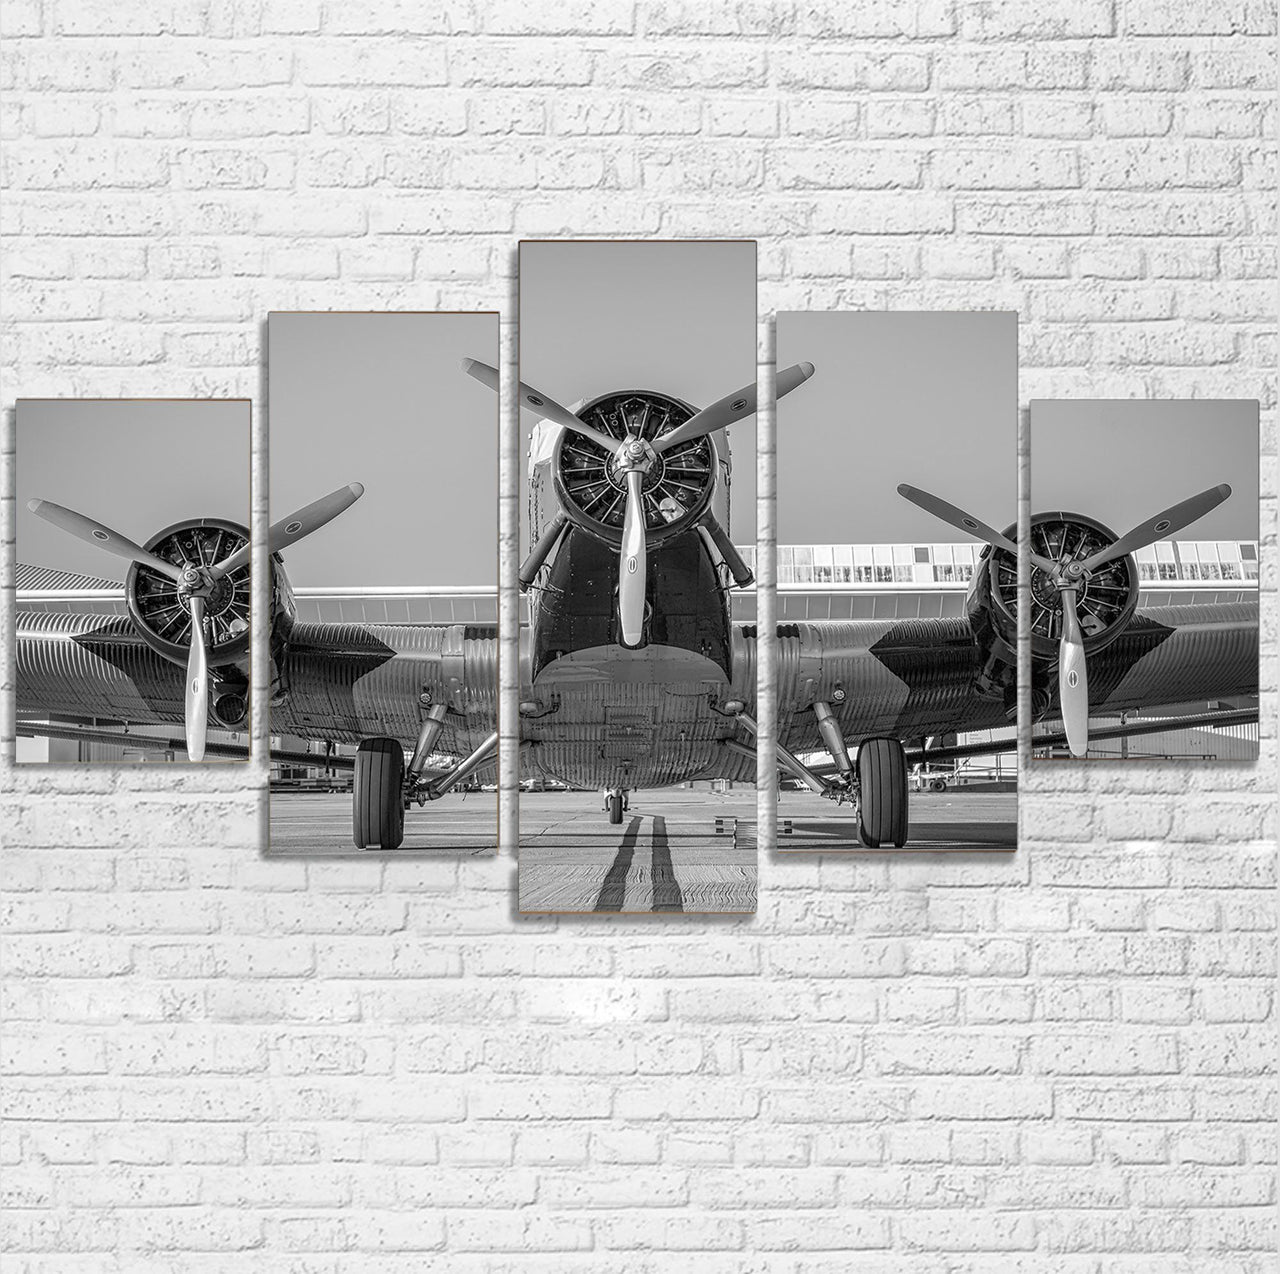 Face to Face to 3 Engine Old Airplane Printed Multiple Canvas Poster Aviation Shop 